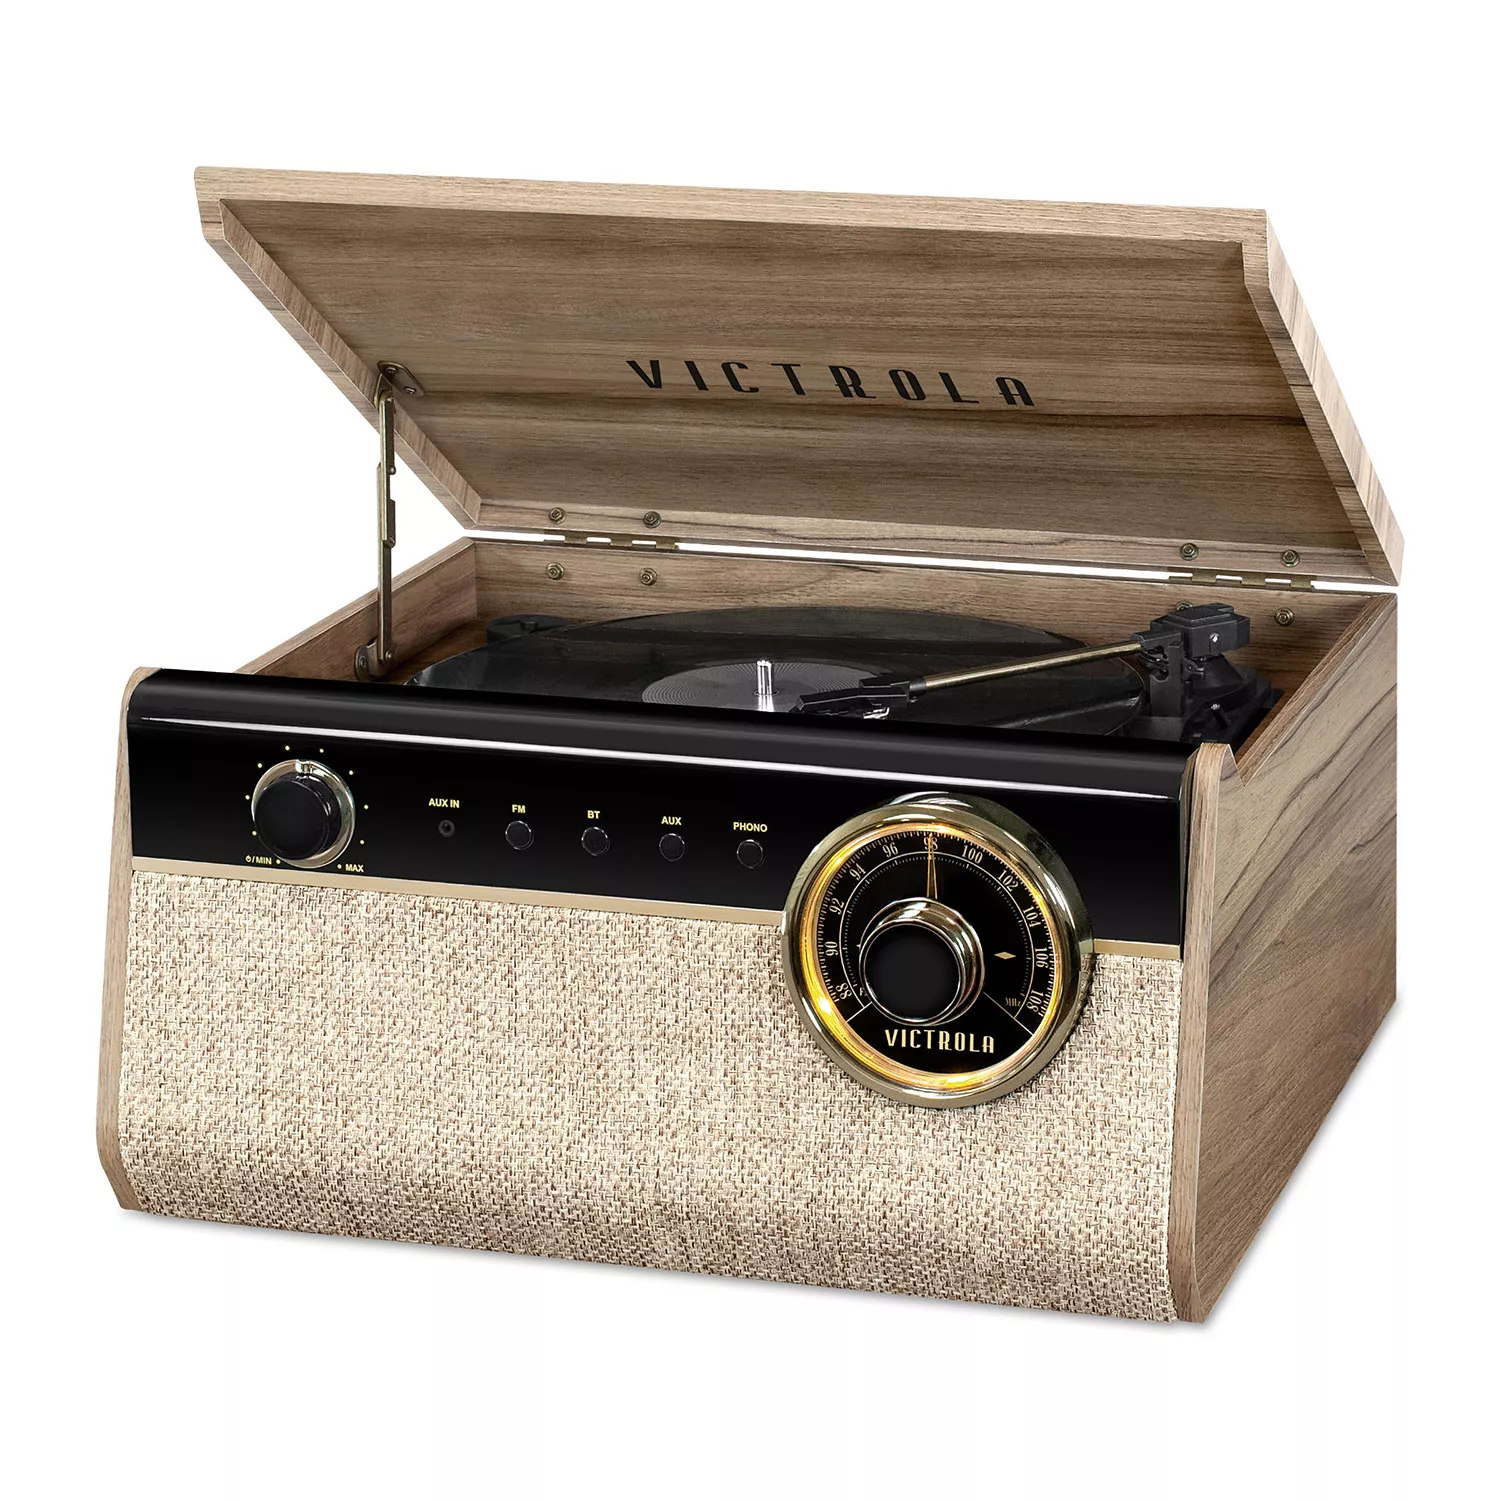 Victrola Austin Bluetooth Record Player in Reclaimed Wood Finish